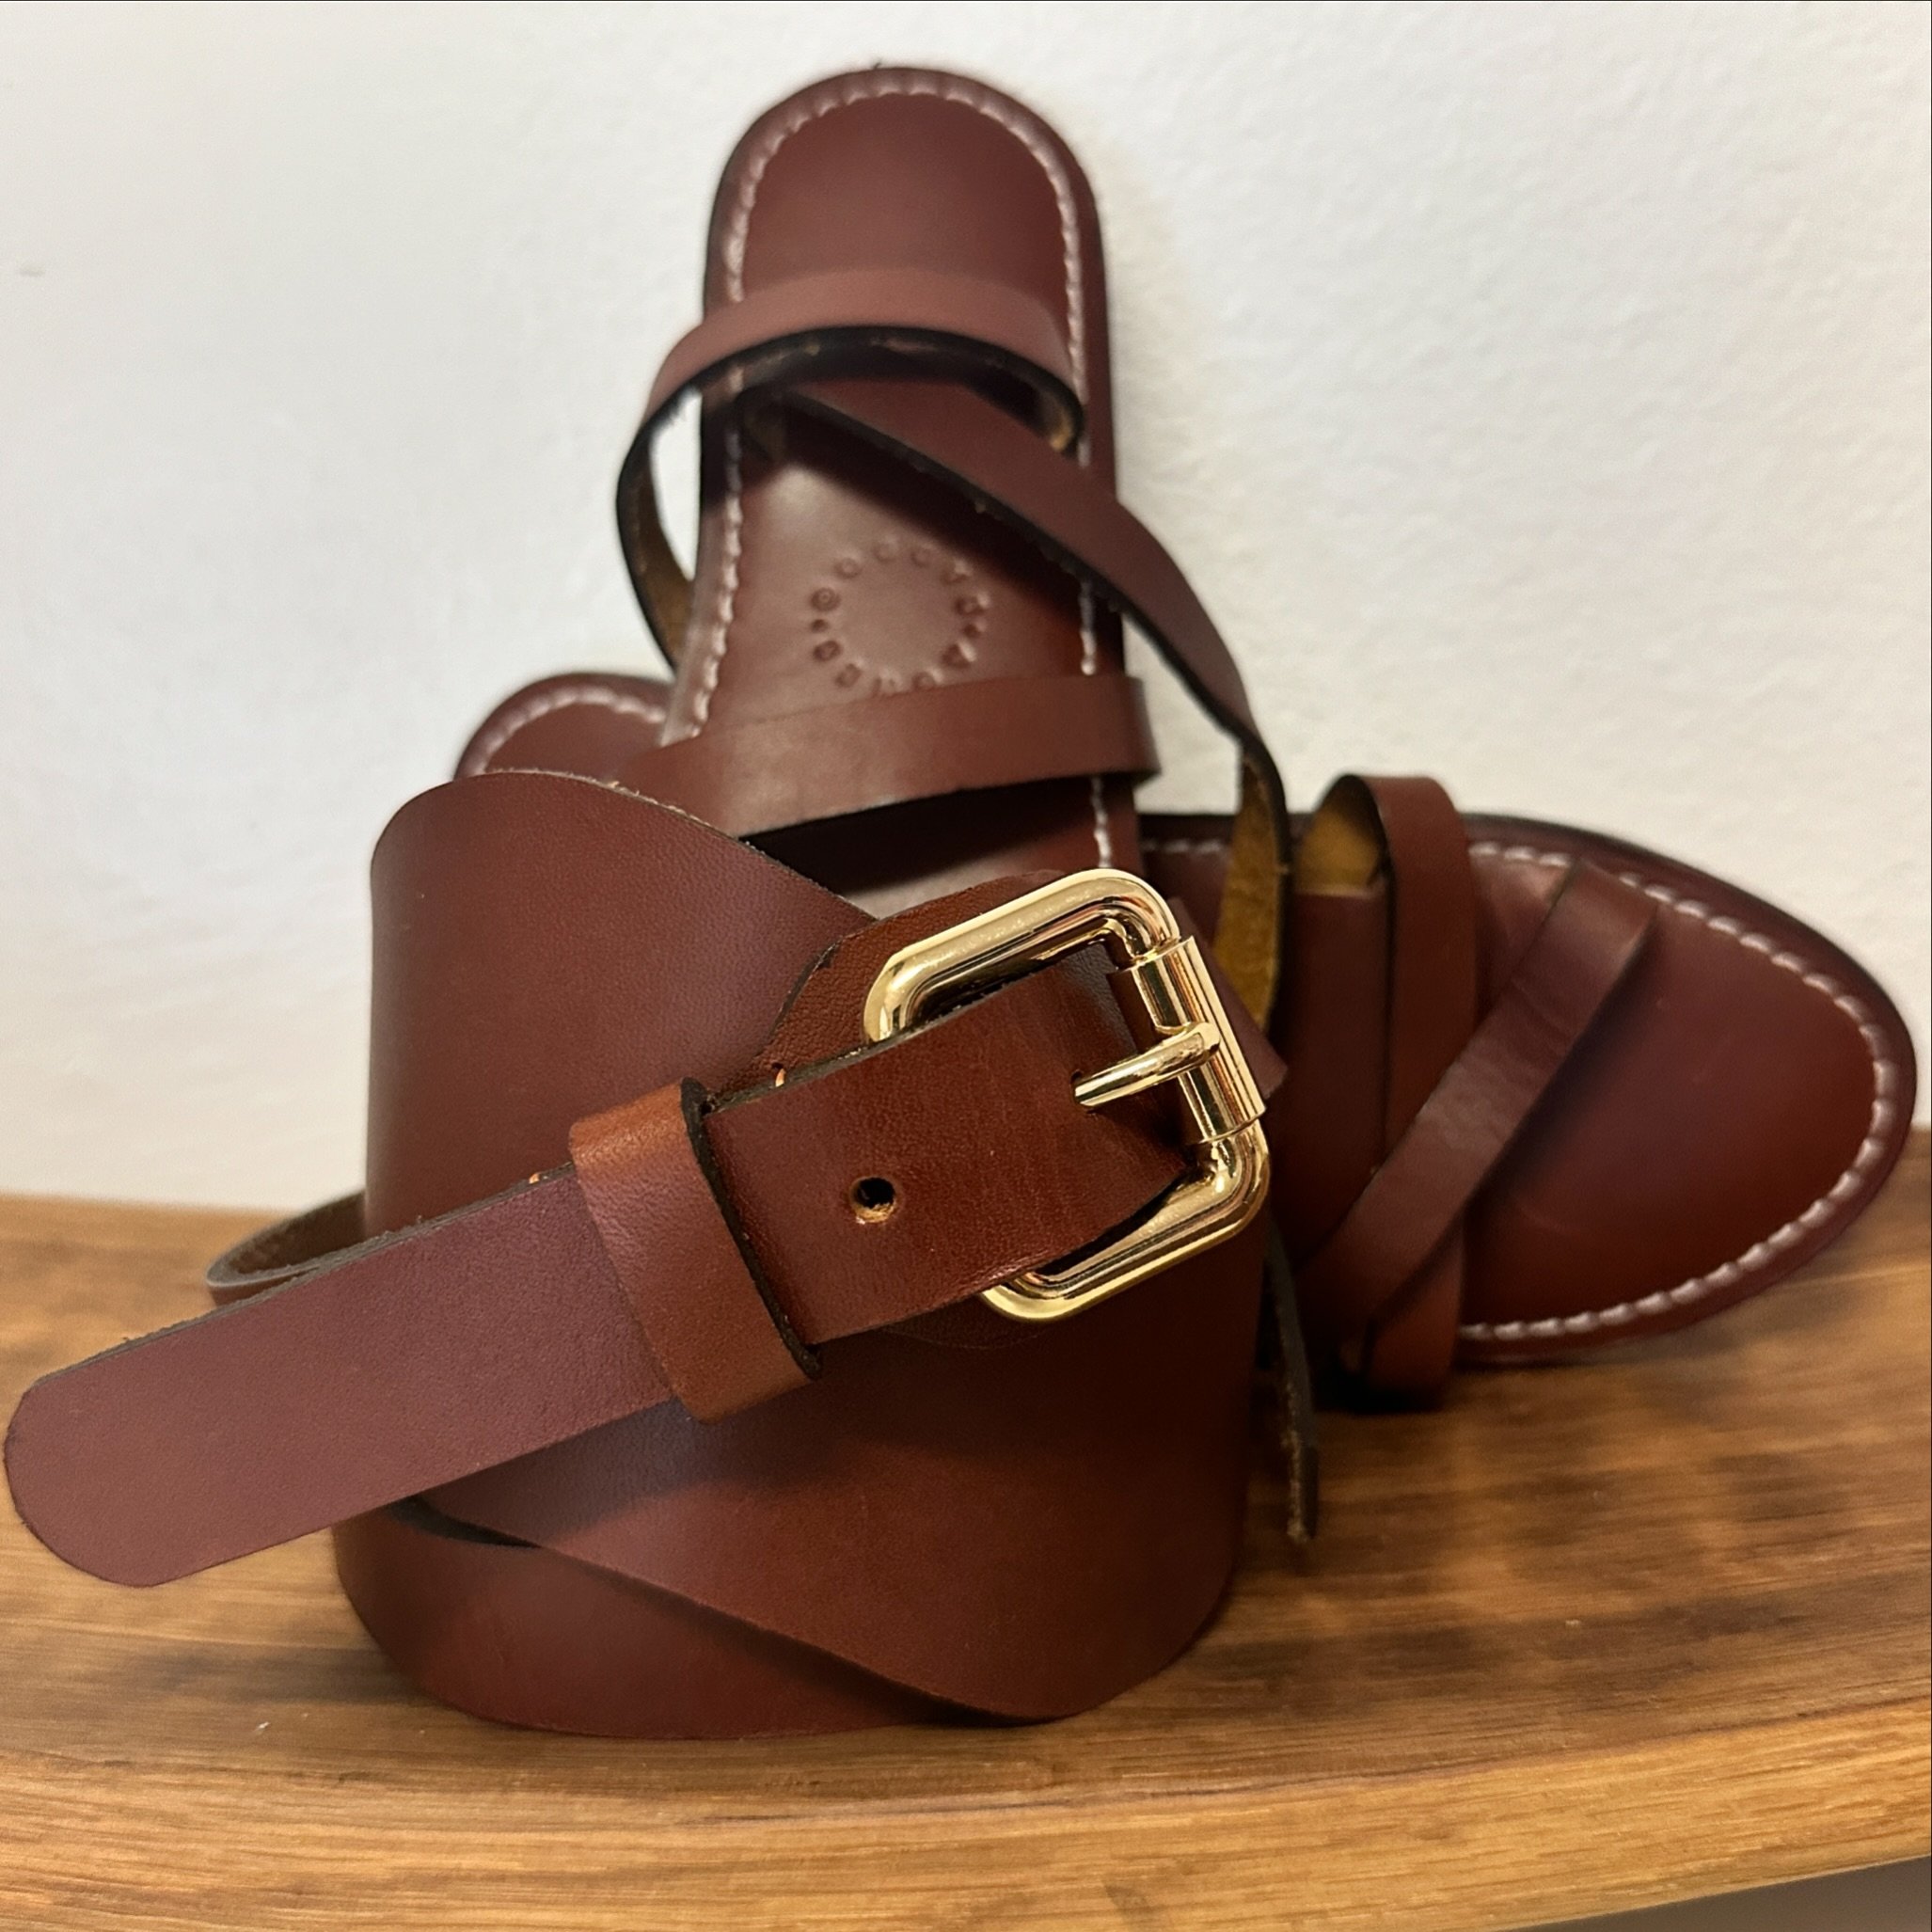 Nothing a belt and some sandals couldn&rsquo;t make better. In stock + Ready to ship.

#agnesbaddoo #leather #leathergoods #sac1sac2 #beltsac #crossbody #crosssandals #sandals #sacpoint5 #carryall #marketsac #wavebelt #simplebelt #coincase #cellphone